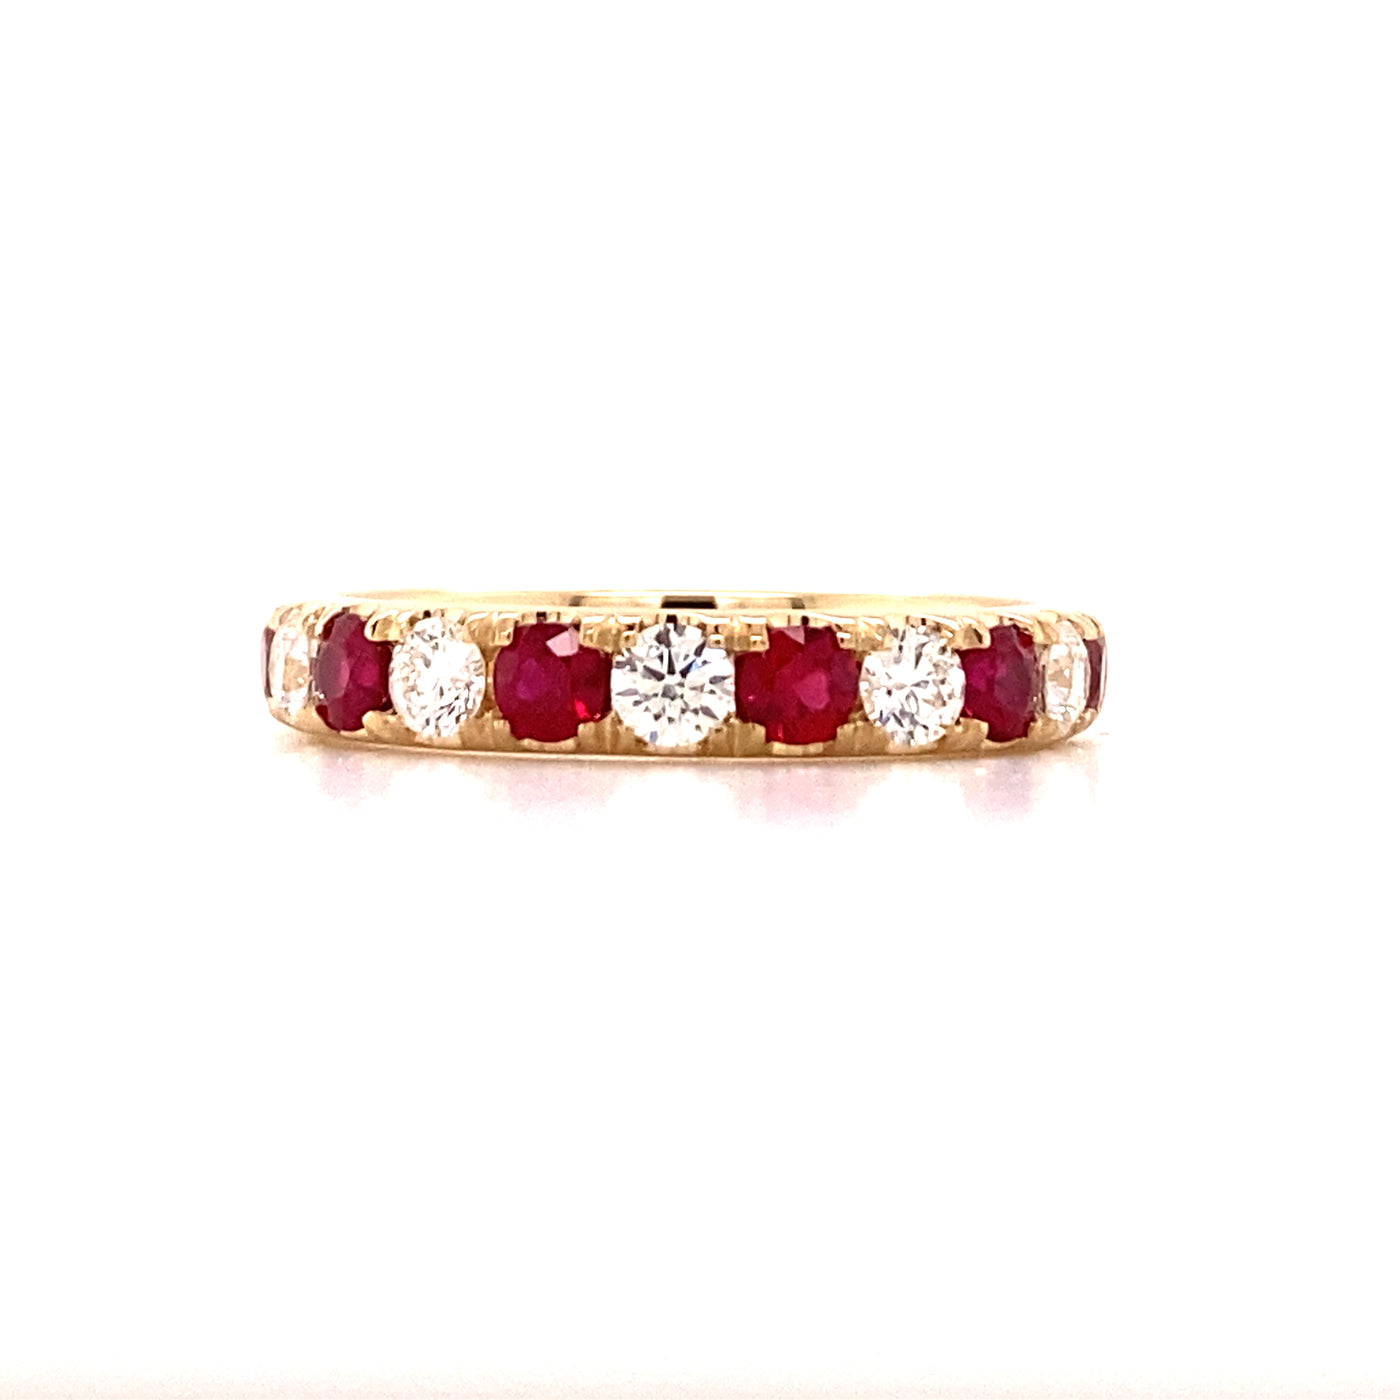 Beeghly & Co. 14 Karat 1.0 Carat Ruby and Diamond Band BCR-7-2.7Y